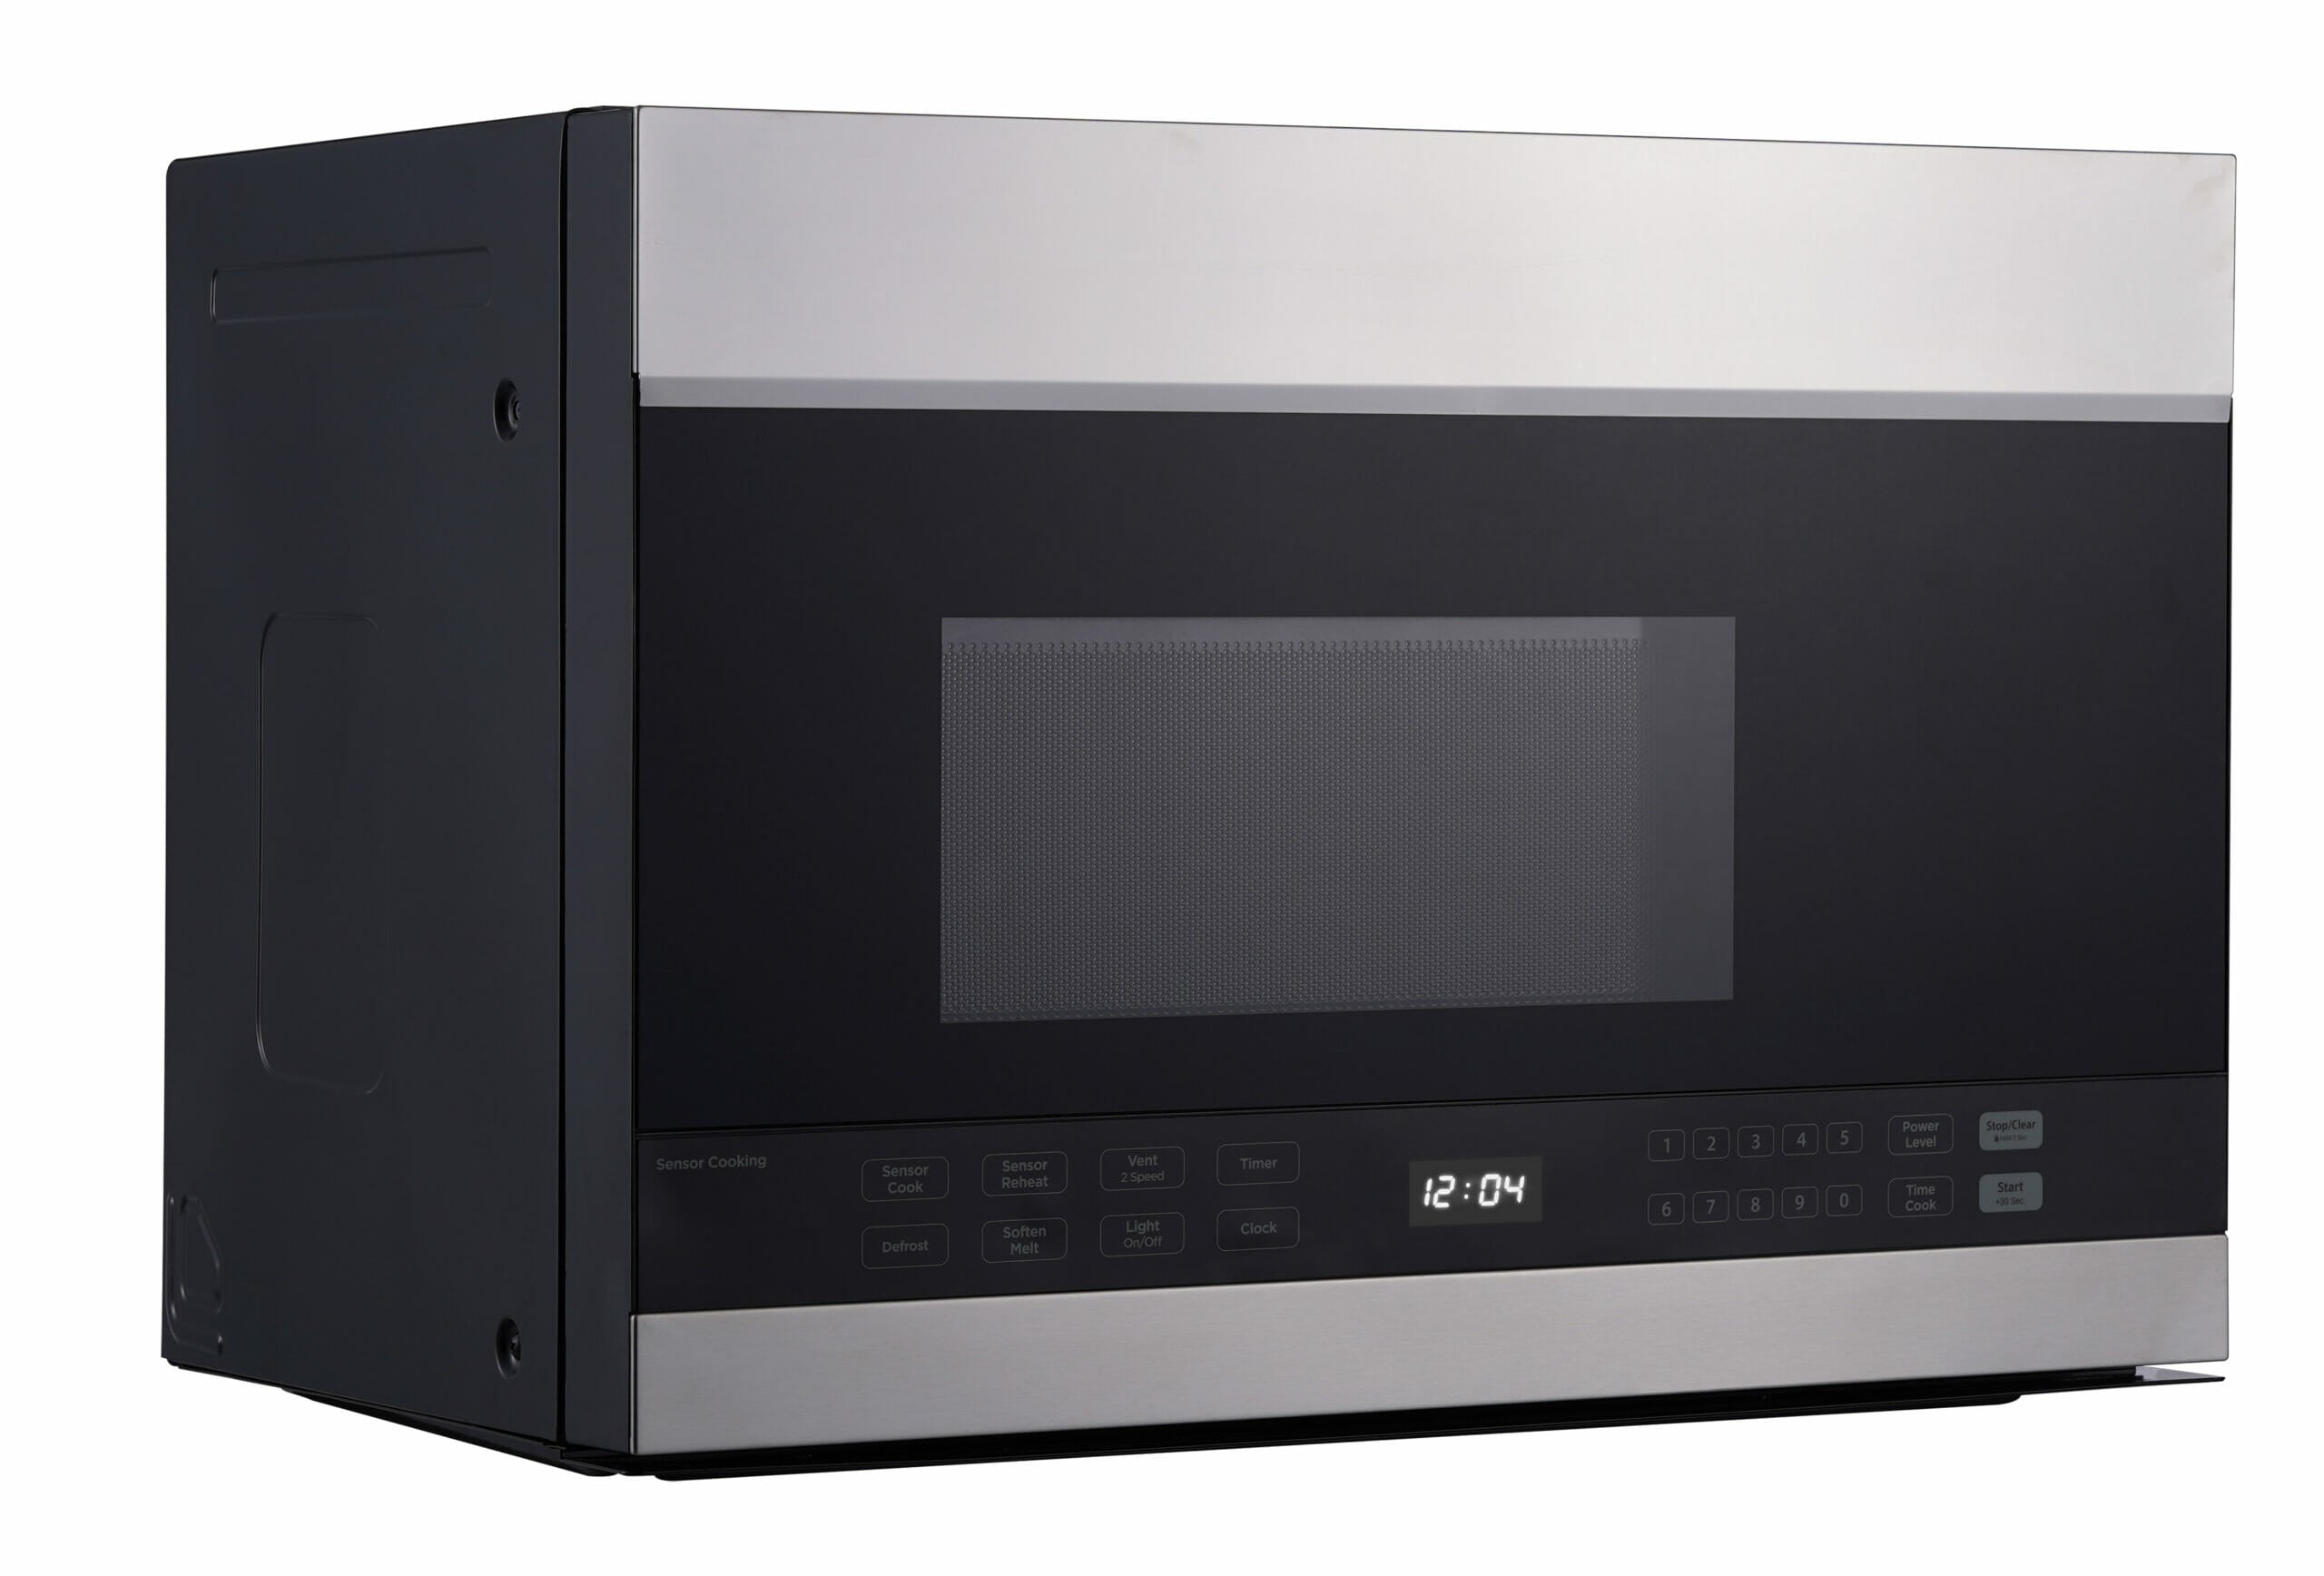 Danby - 1.4 cu. Ft  Over the range Microwave in Stainless - DOM014401G1